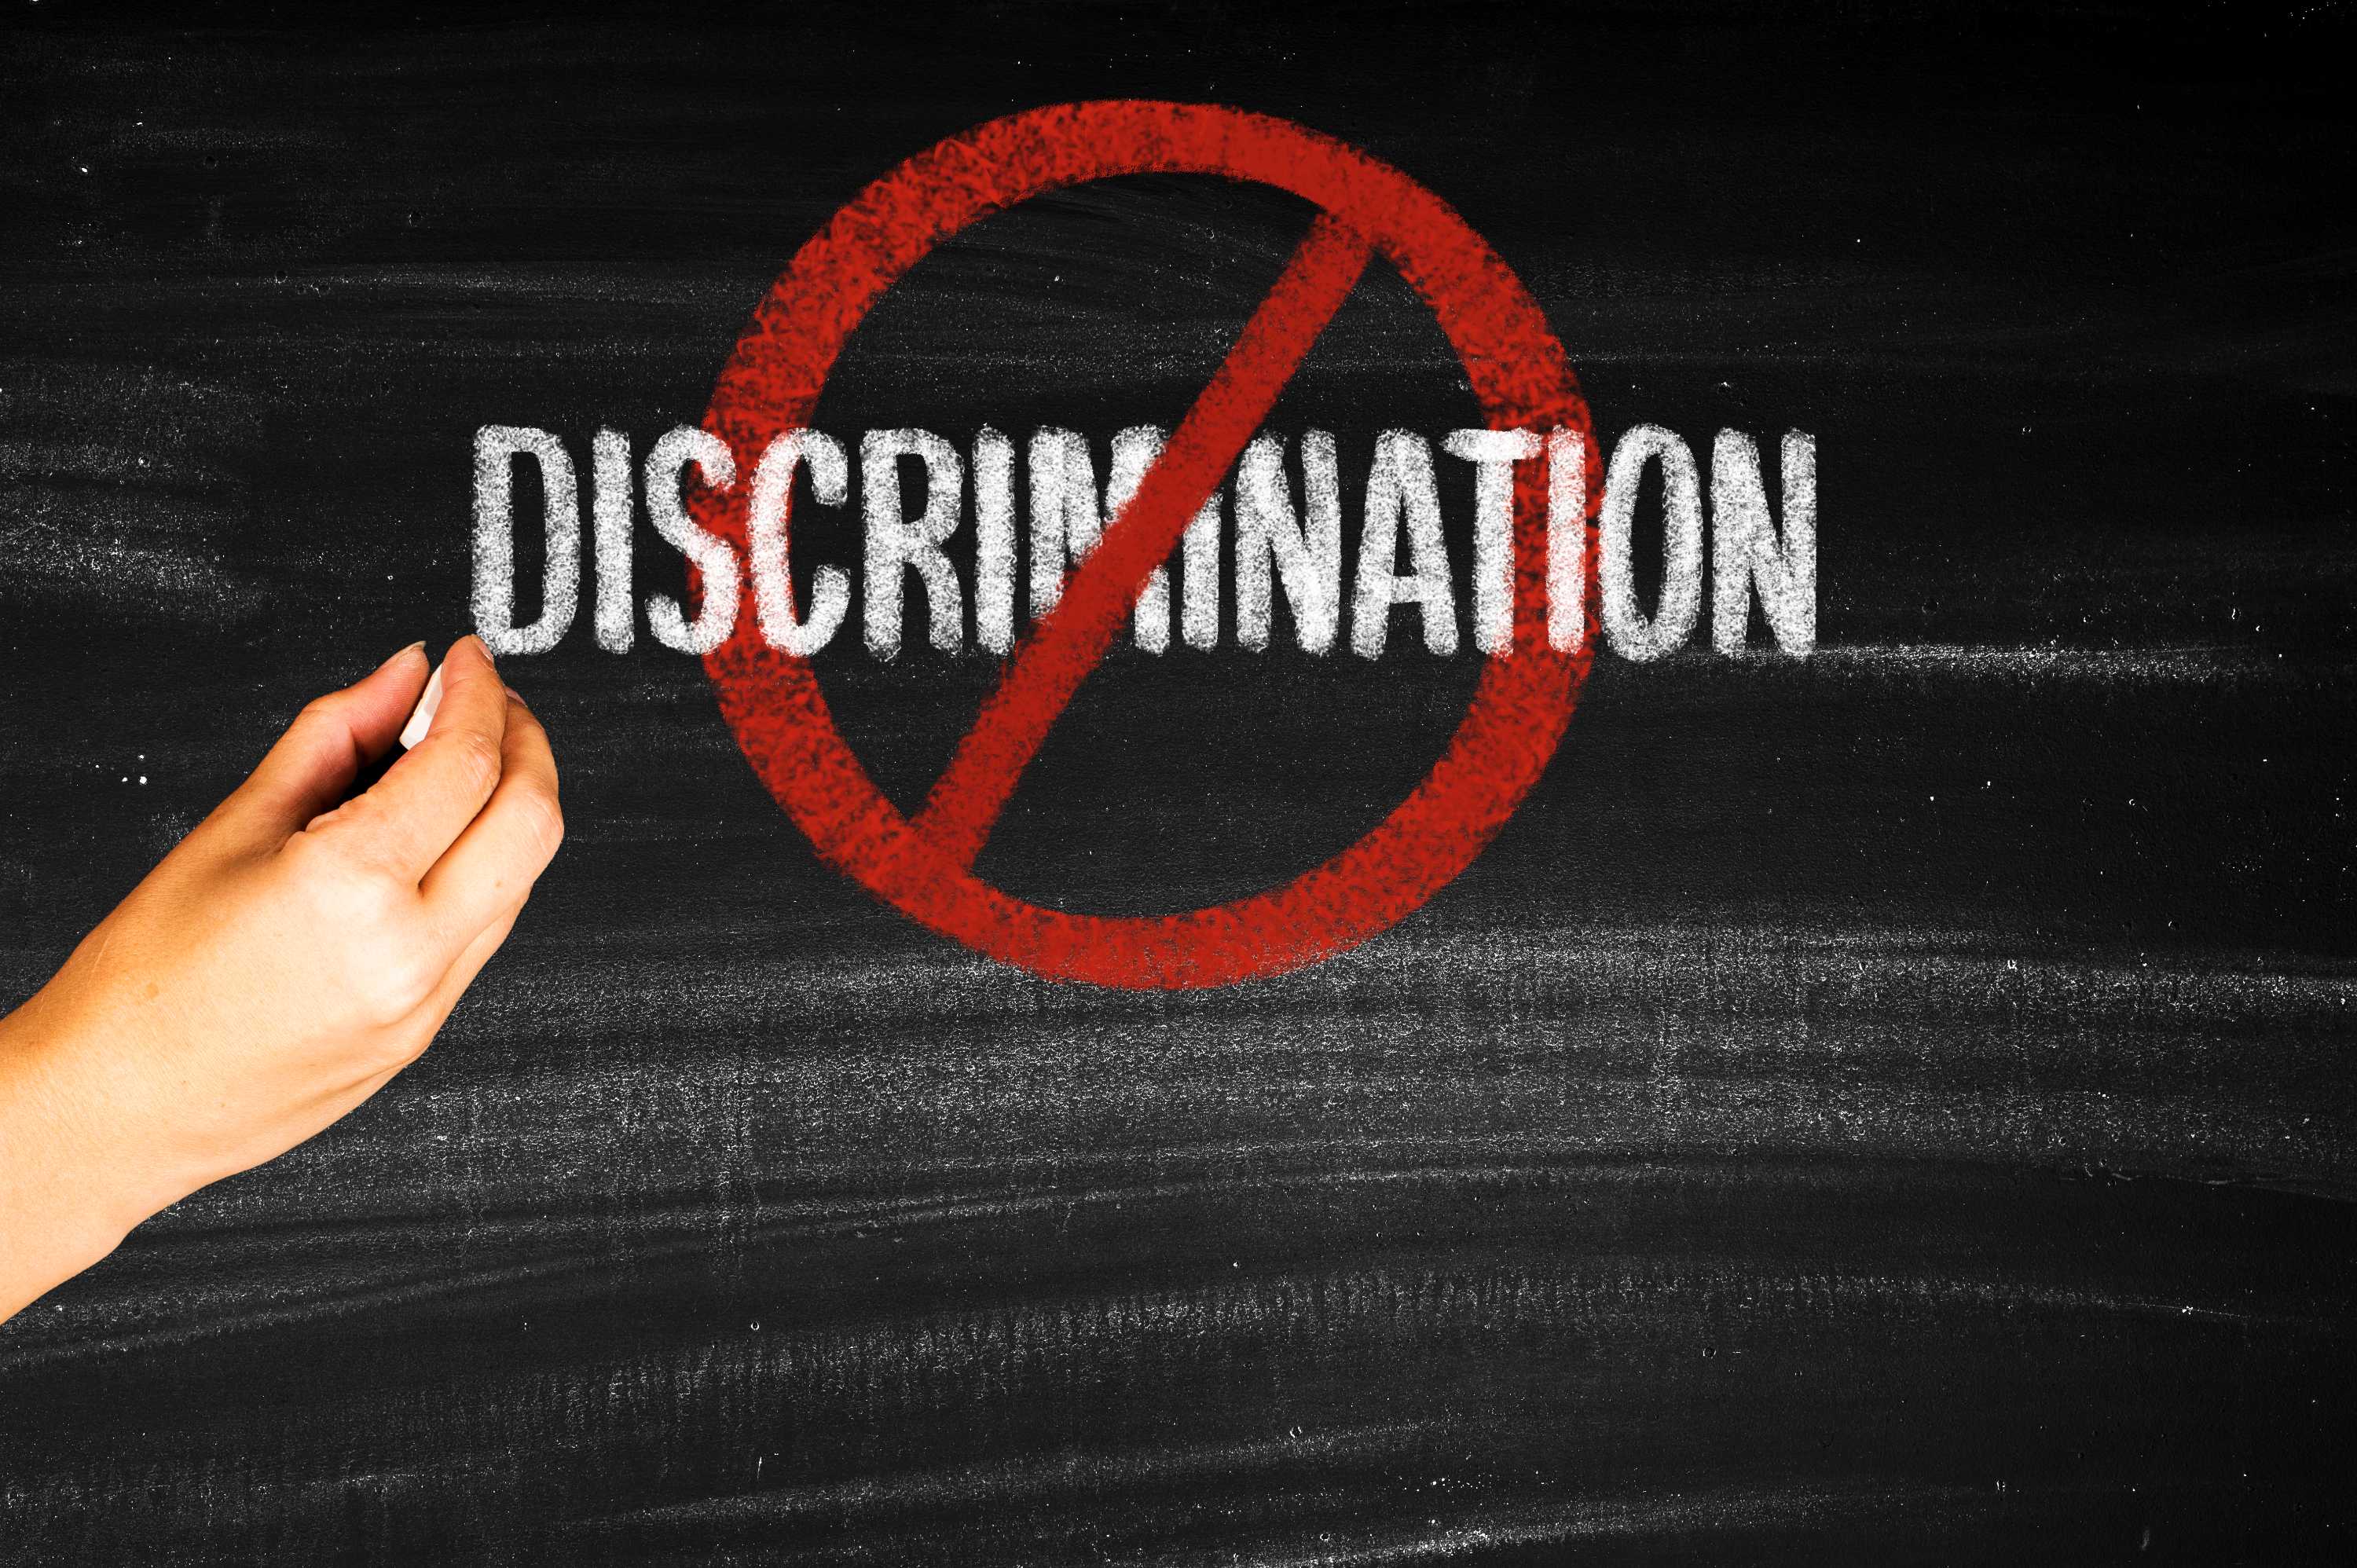 Was the Religious Discrimination Bill destined to fail?